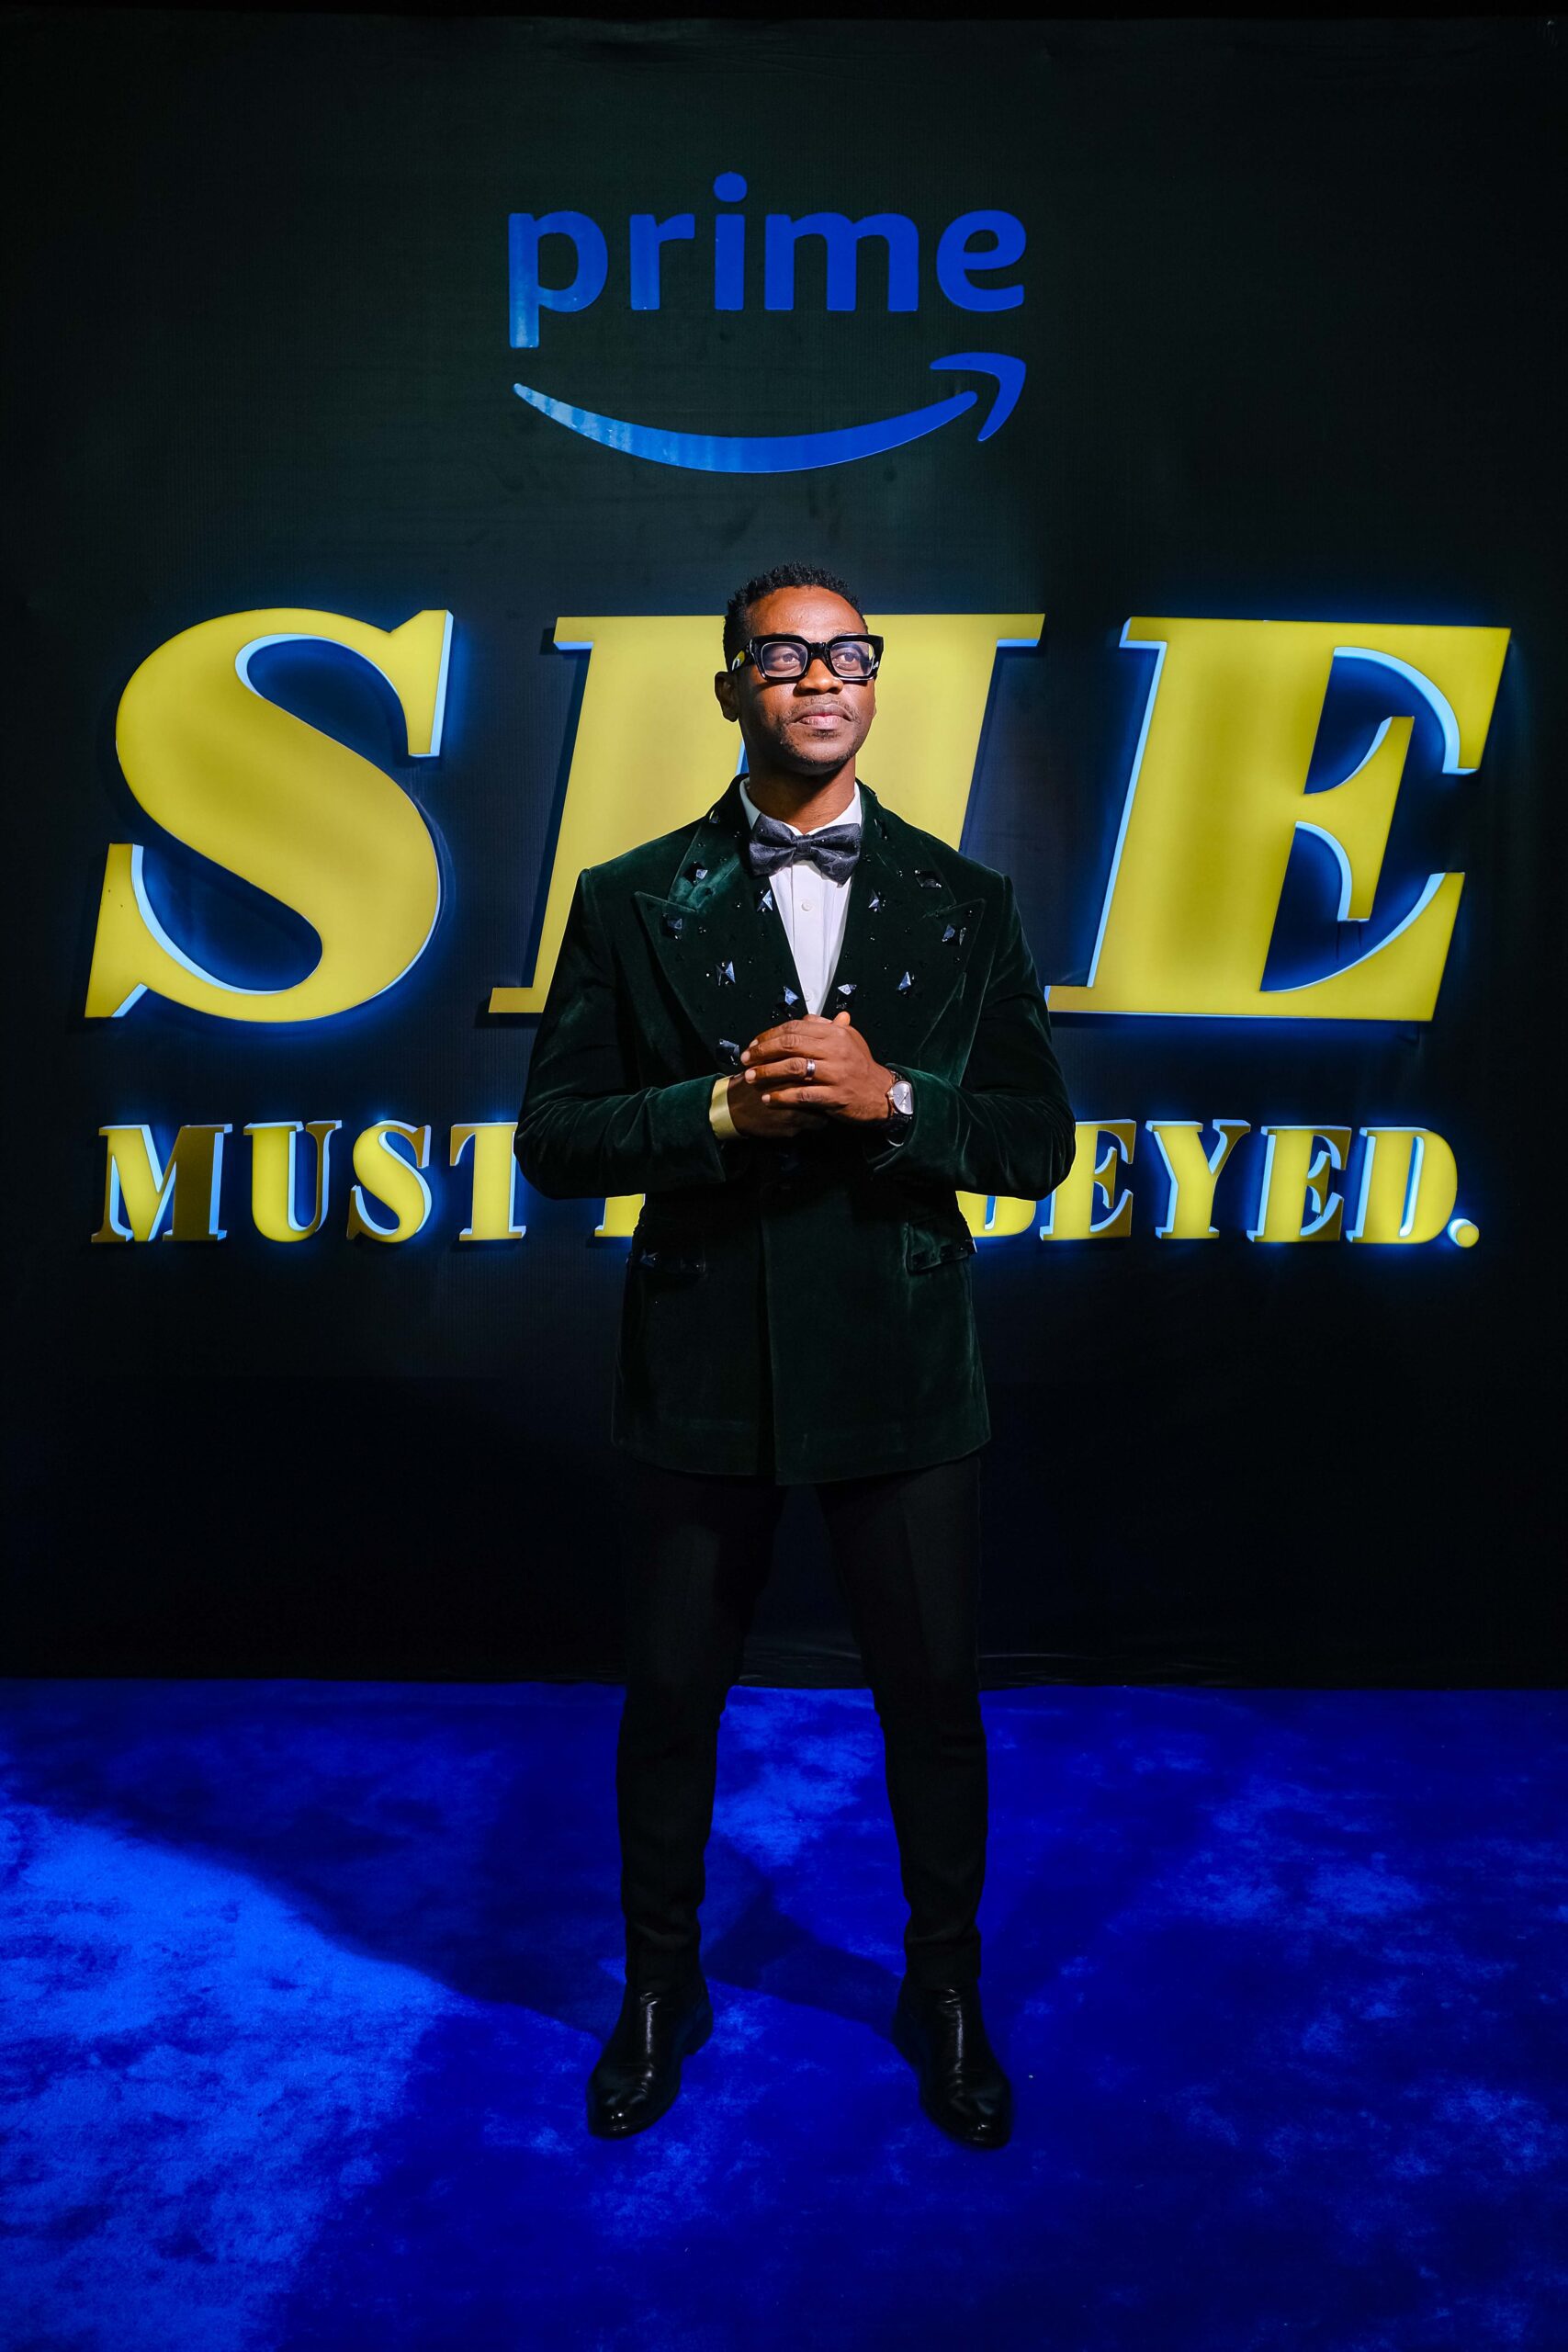 BIGV9780 scaled - Prime Video Launches “She Must Be Obeyed” Series, Its 3rd Nigerian Original Title With Grandeur and Style!